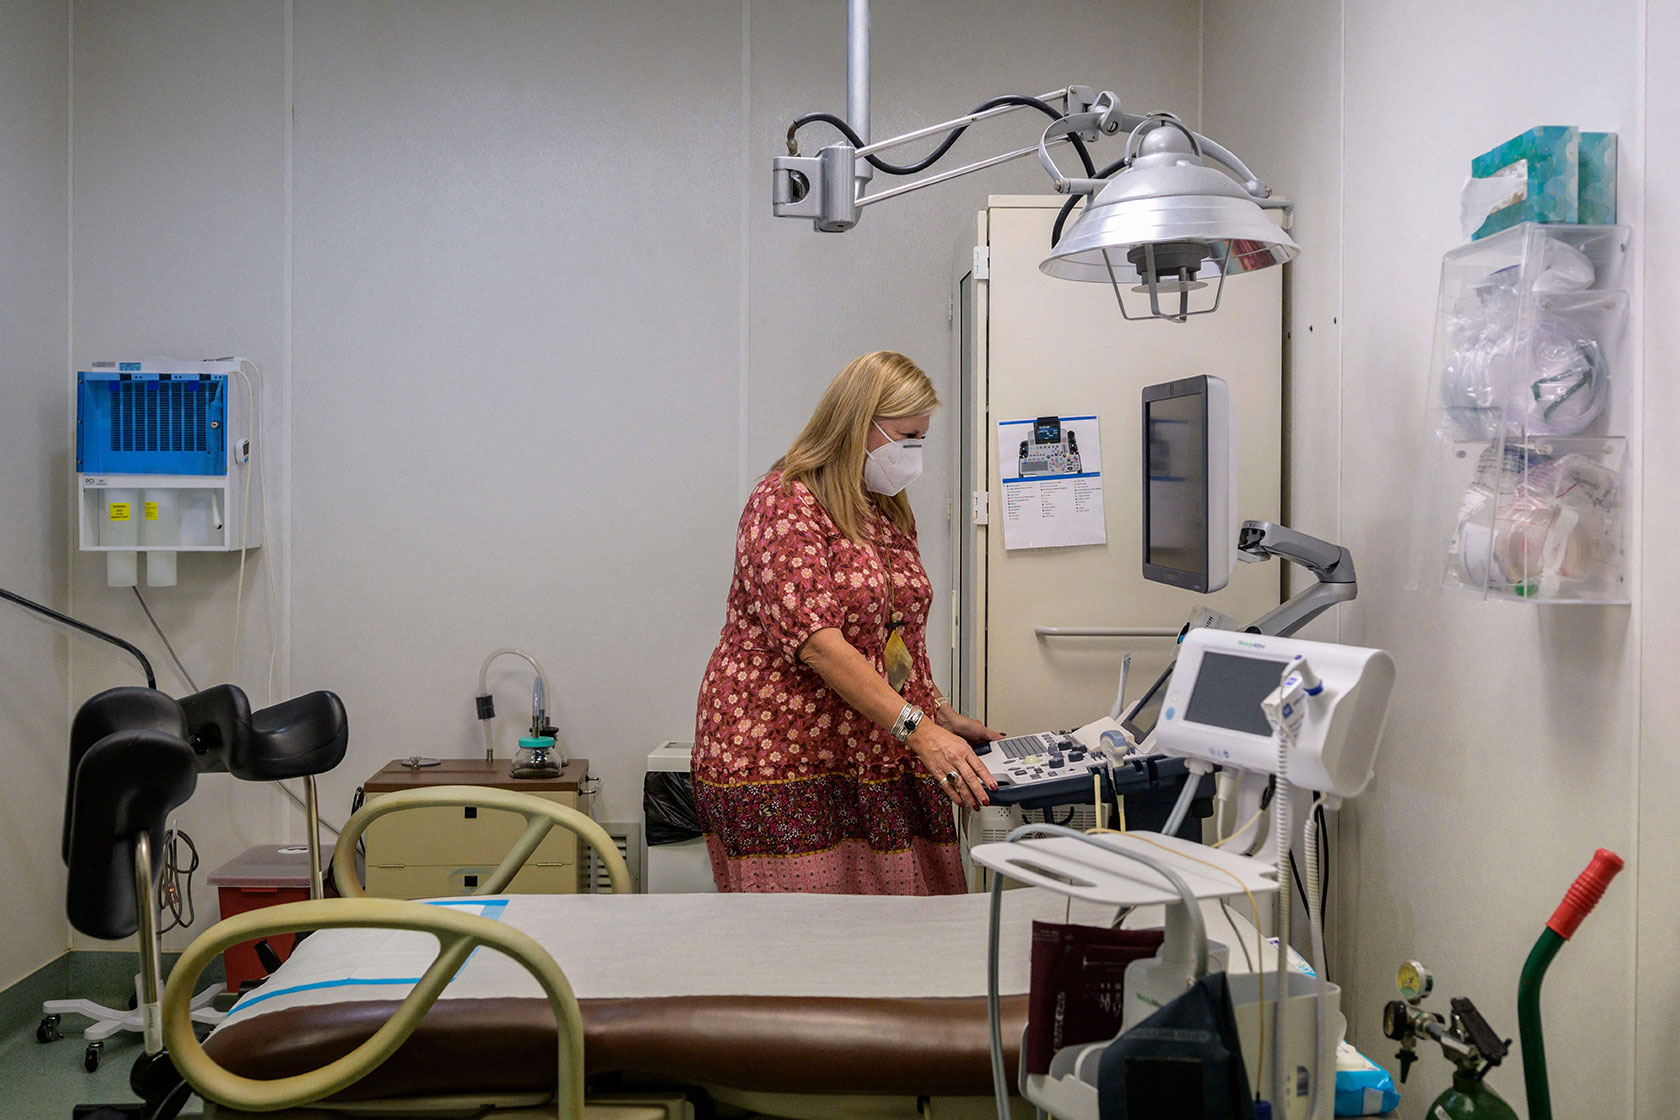 Photo shows a woman wearing a mask standing next to a gurney in an exam room